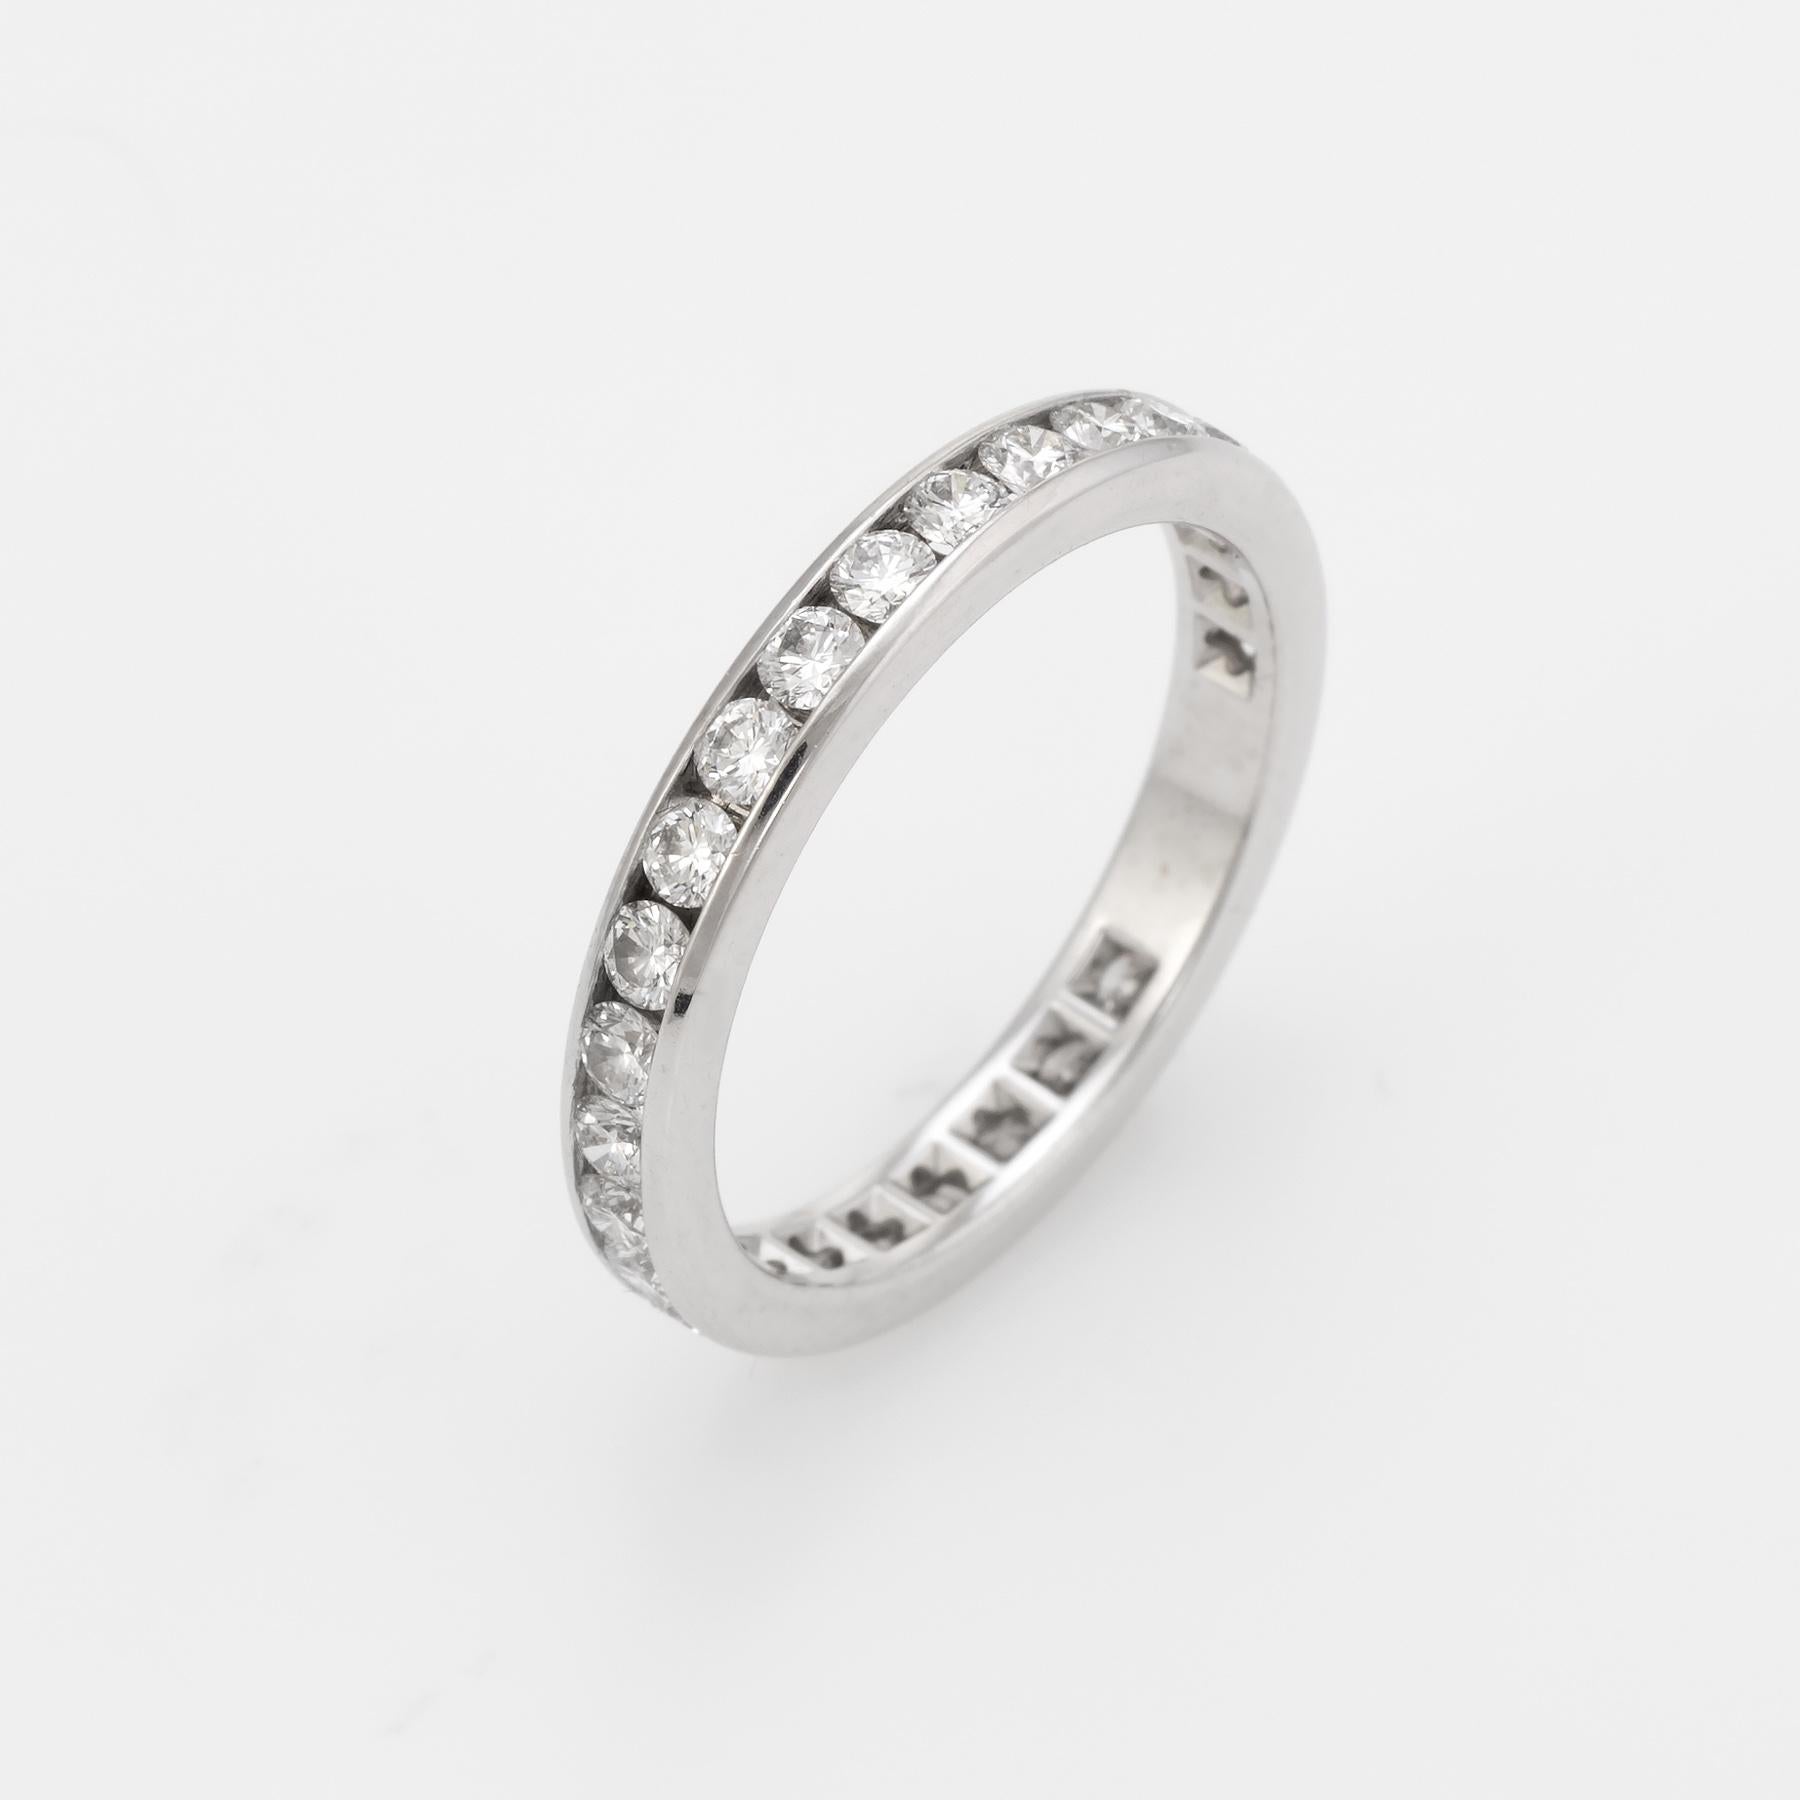 Pre owned Tiffany & Co diamond wedding band, crafted in 950 platinum.  

28 round brilliant cut diamonds are channel set into the band and total an estimated 1 carat (estimated at F-G color and VVS1 clarity).

The ring currently retails for $5,150